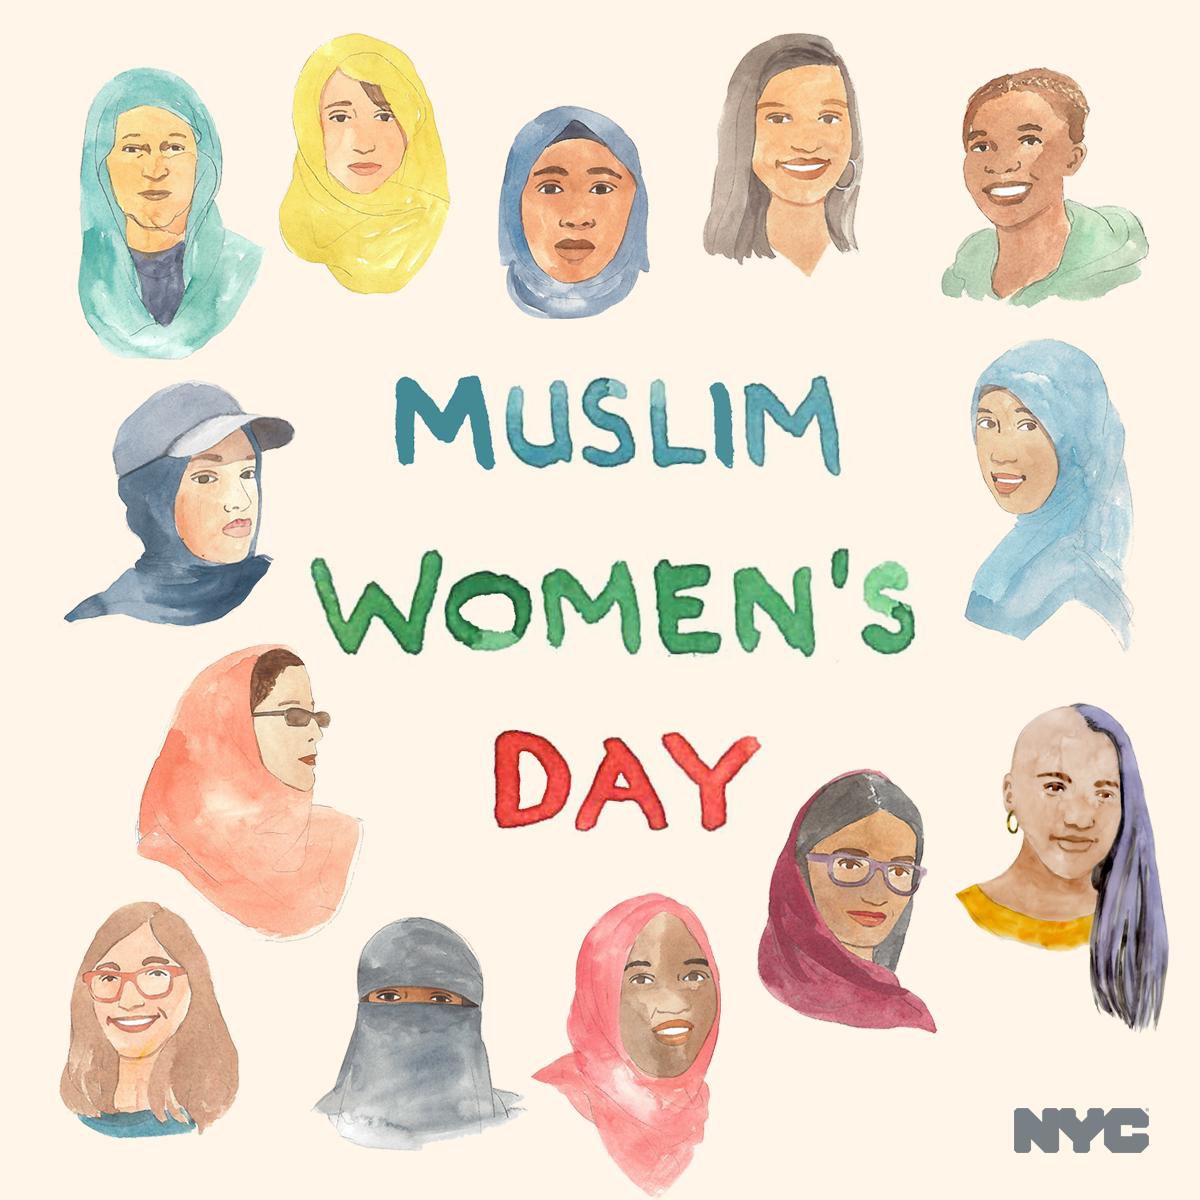 Happy #MuslimWomensDay to all my beautiful sisters!! May we stay shining in the dark times, may we stay strong in hard times and may we stay kind always never let anyone make you feel less than the precious nur that you are!